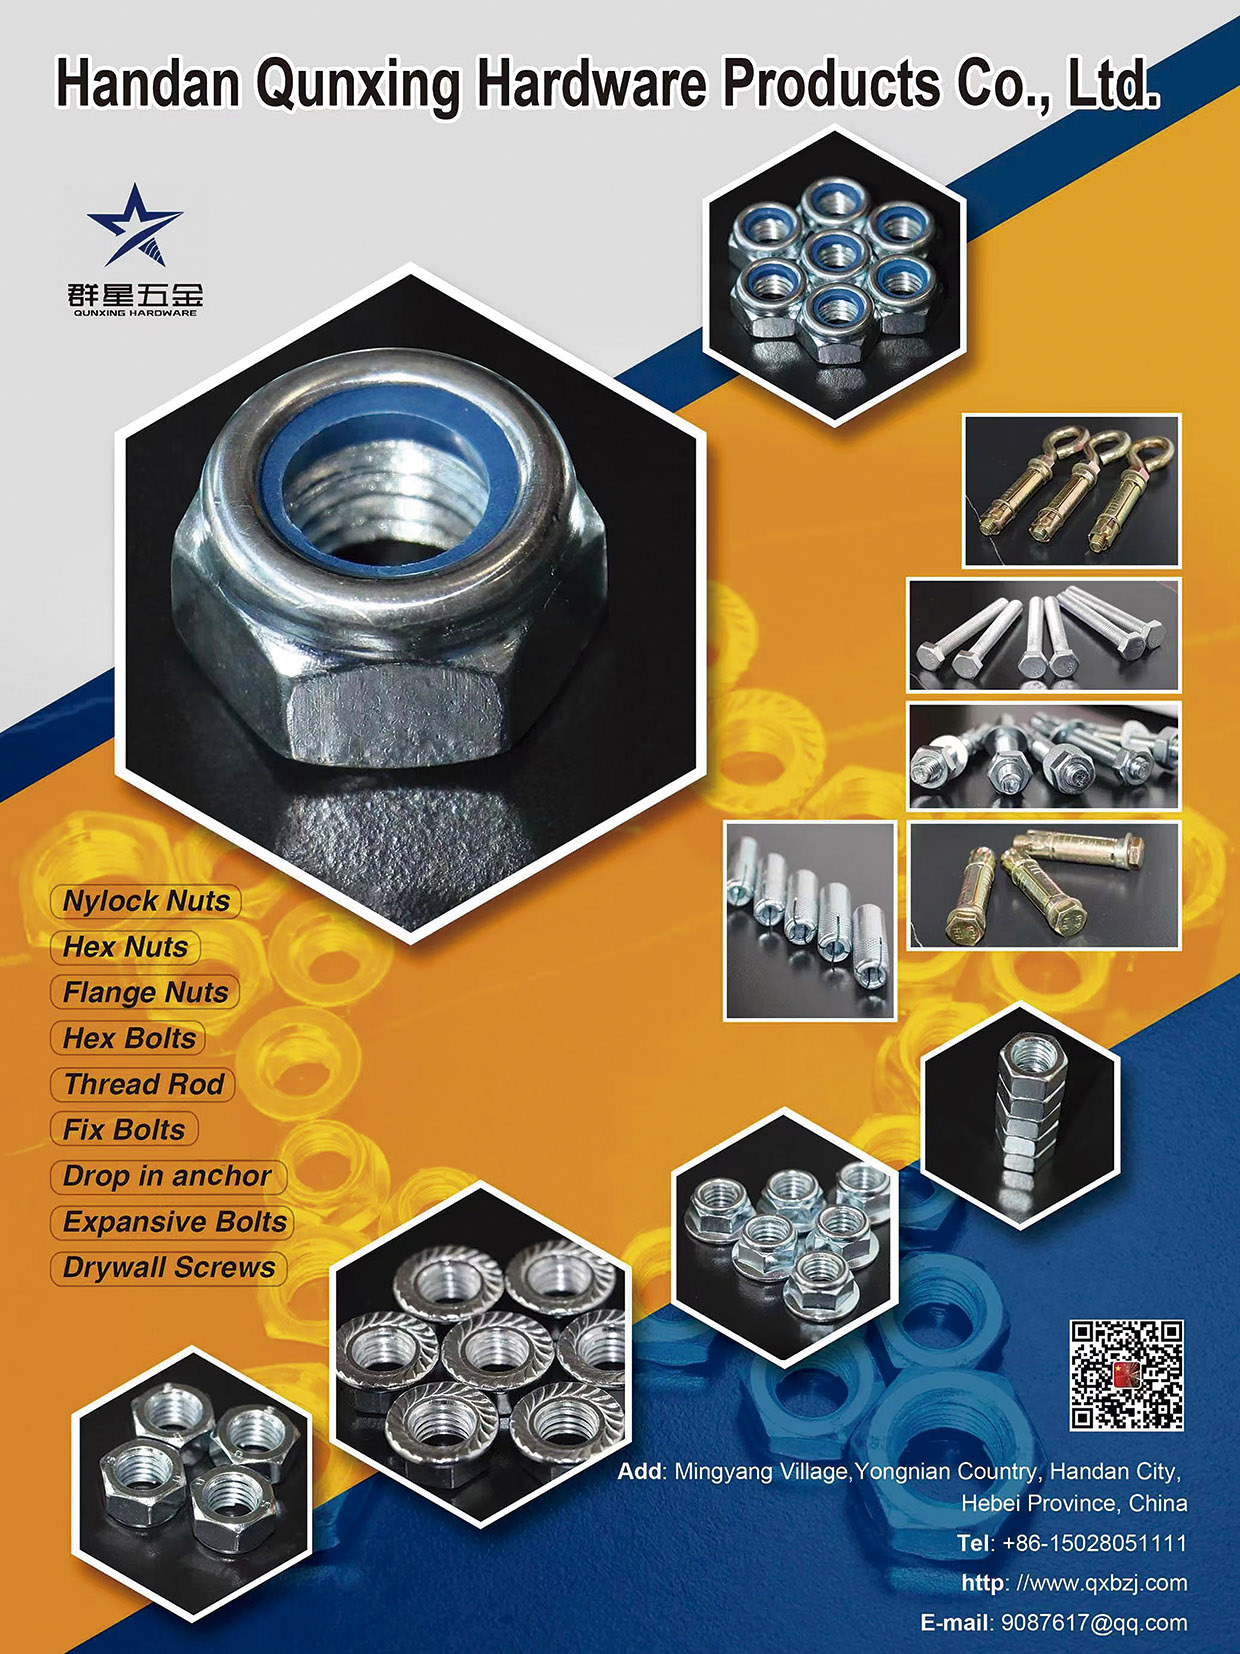 Handan Qunxing Hardware Products Co., Ltd. , Nylock Nuts, Hex Nuts, Flange Nuts, Hex Bolts, Thread Rod, Fix Bolts, Drop-in Anchors, Expansive Bolts, Drywall Screws